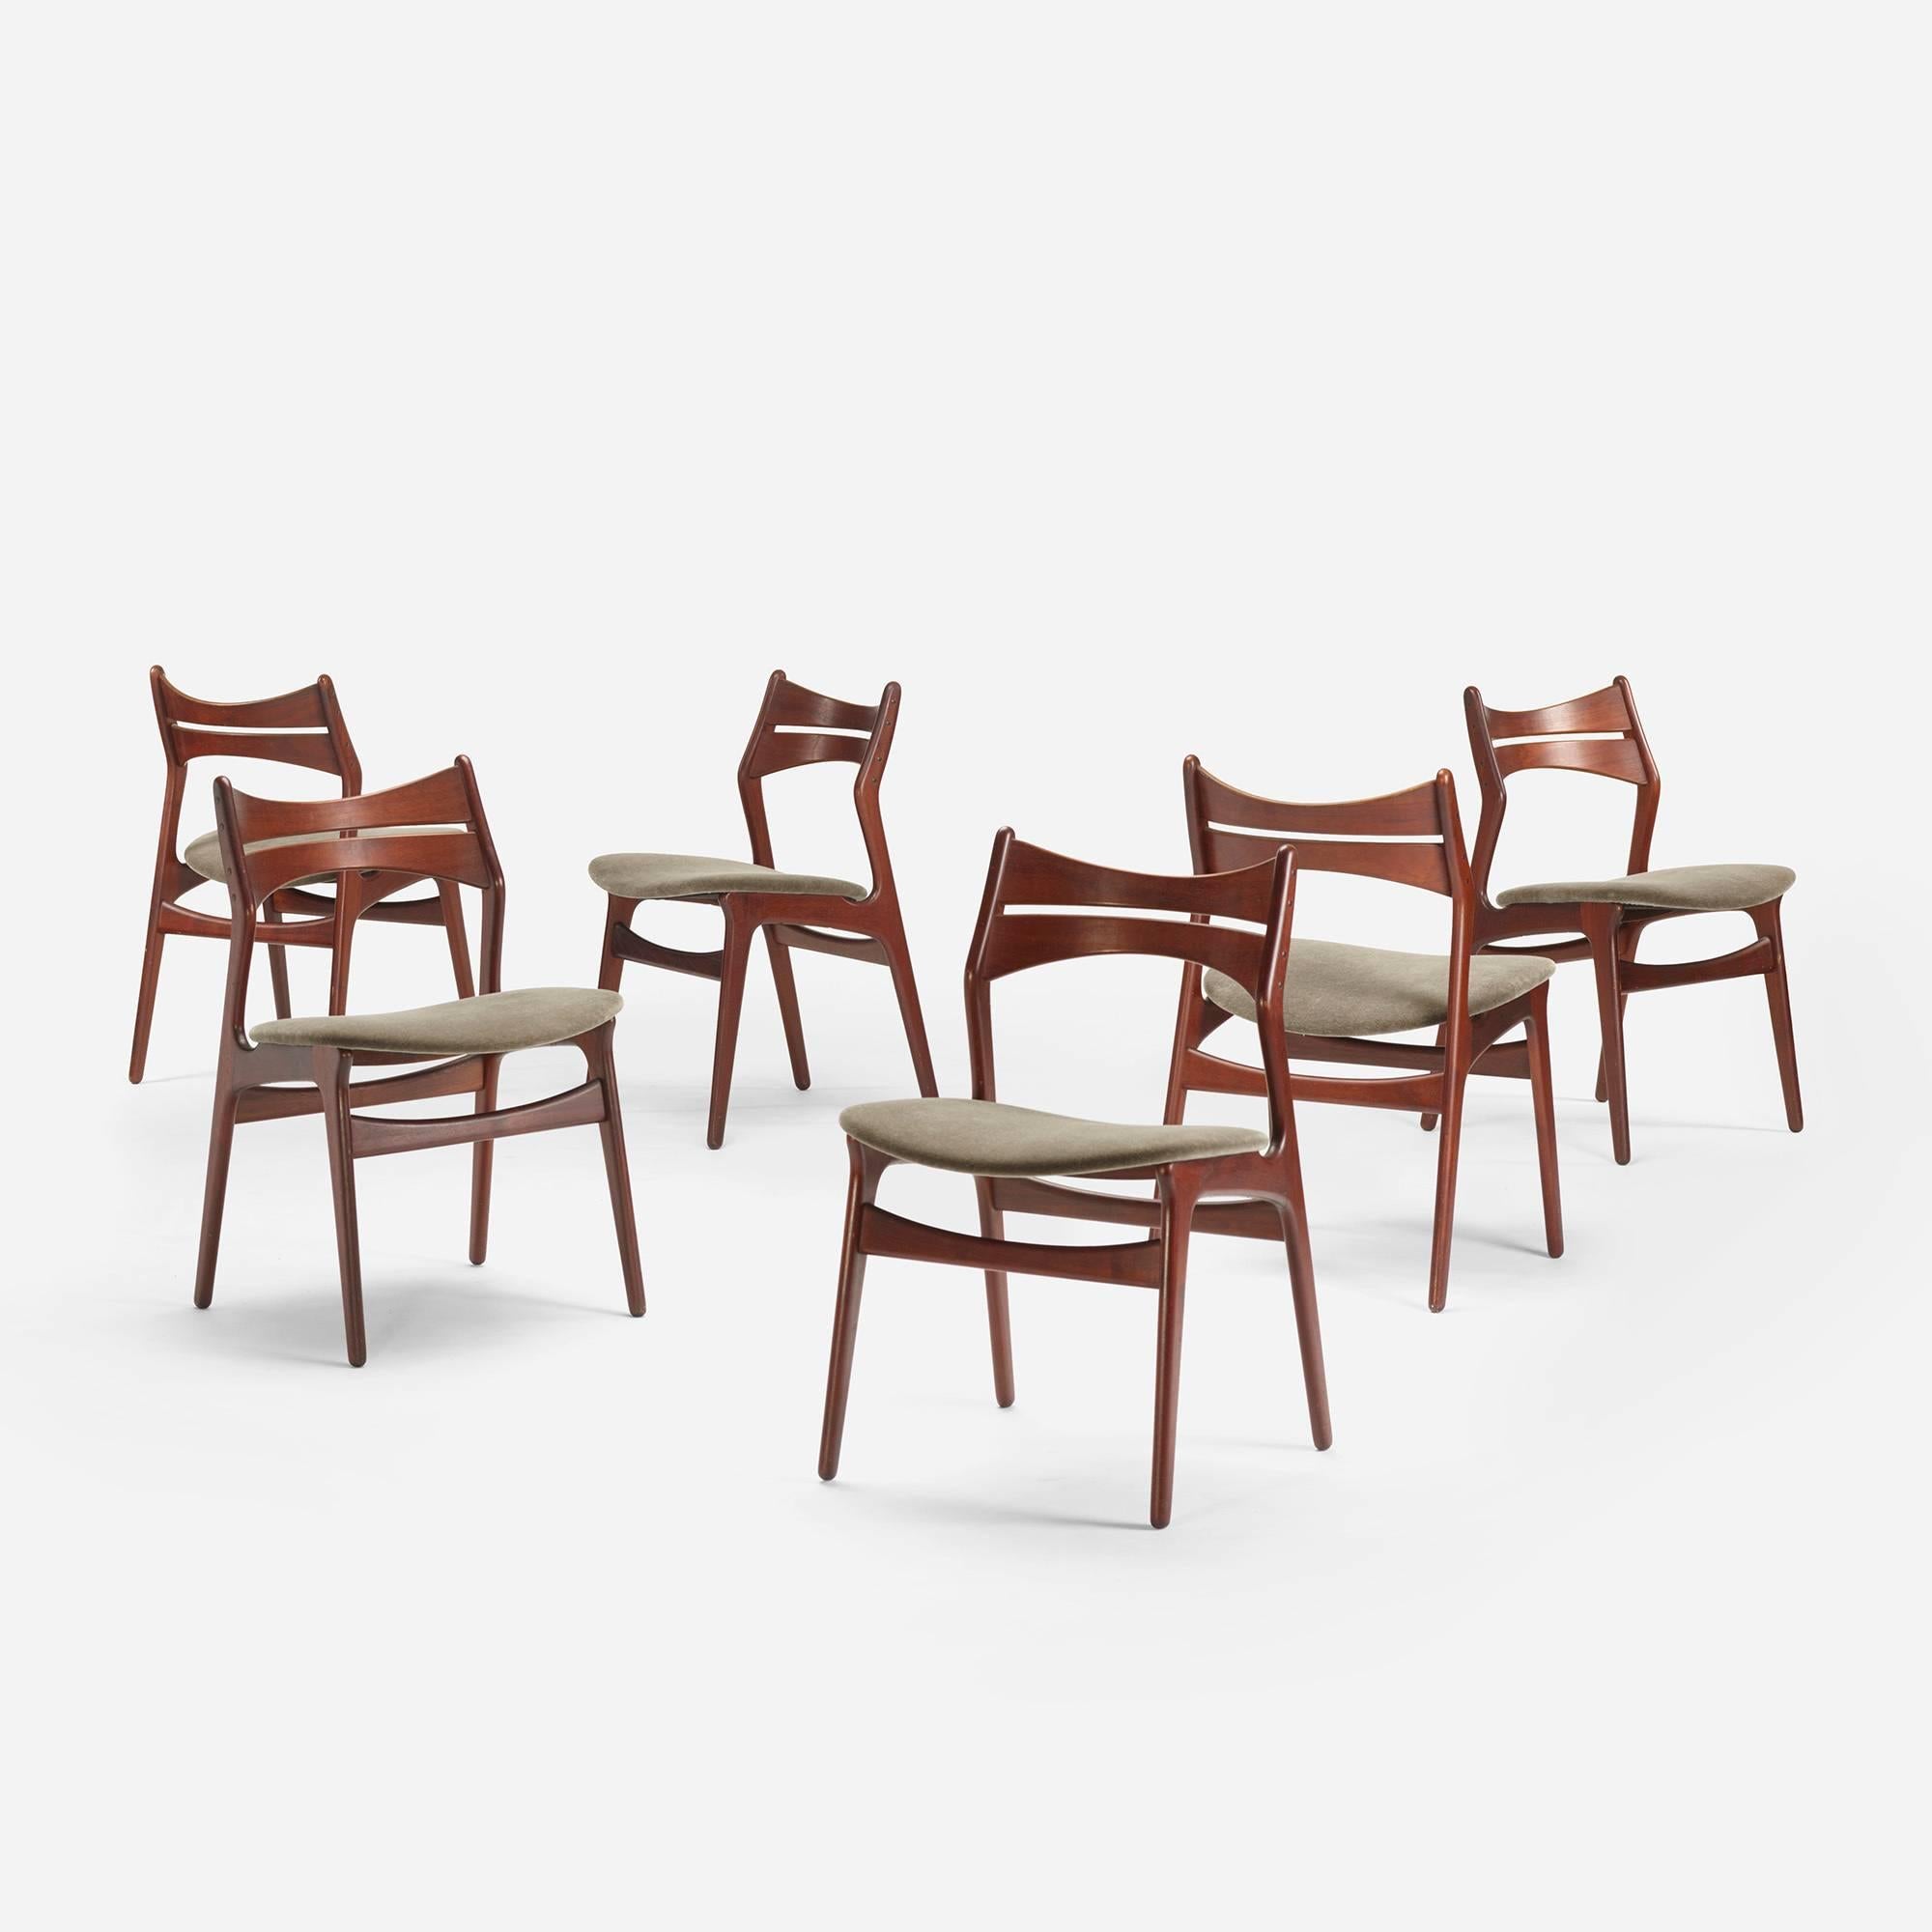 Attractive and universally comfortable, this versatile dining chair is suitable for numerous table styles.